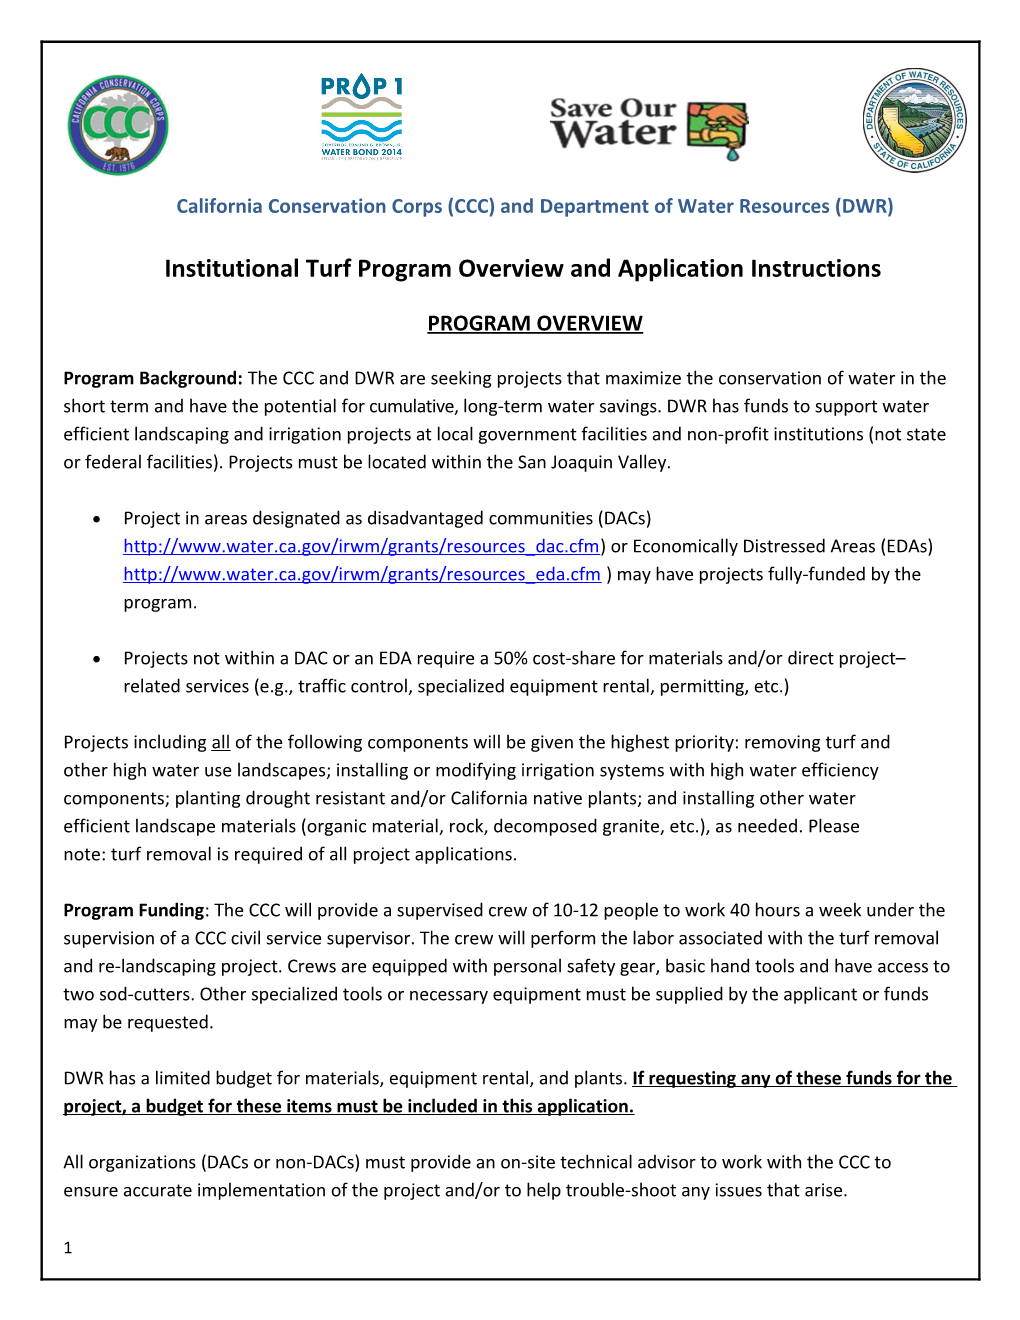 California Conservation Corps (CCC) and Department of Water Resources (DWR)